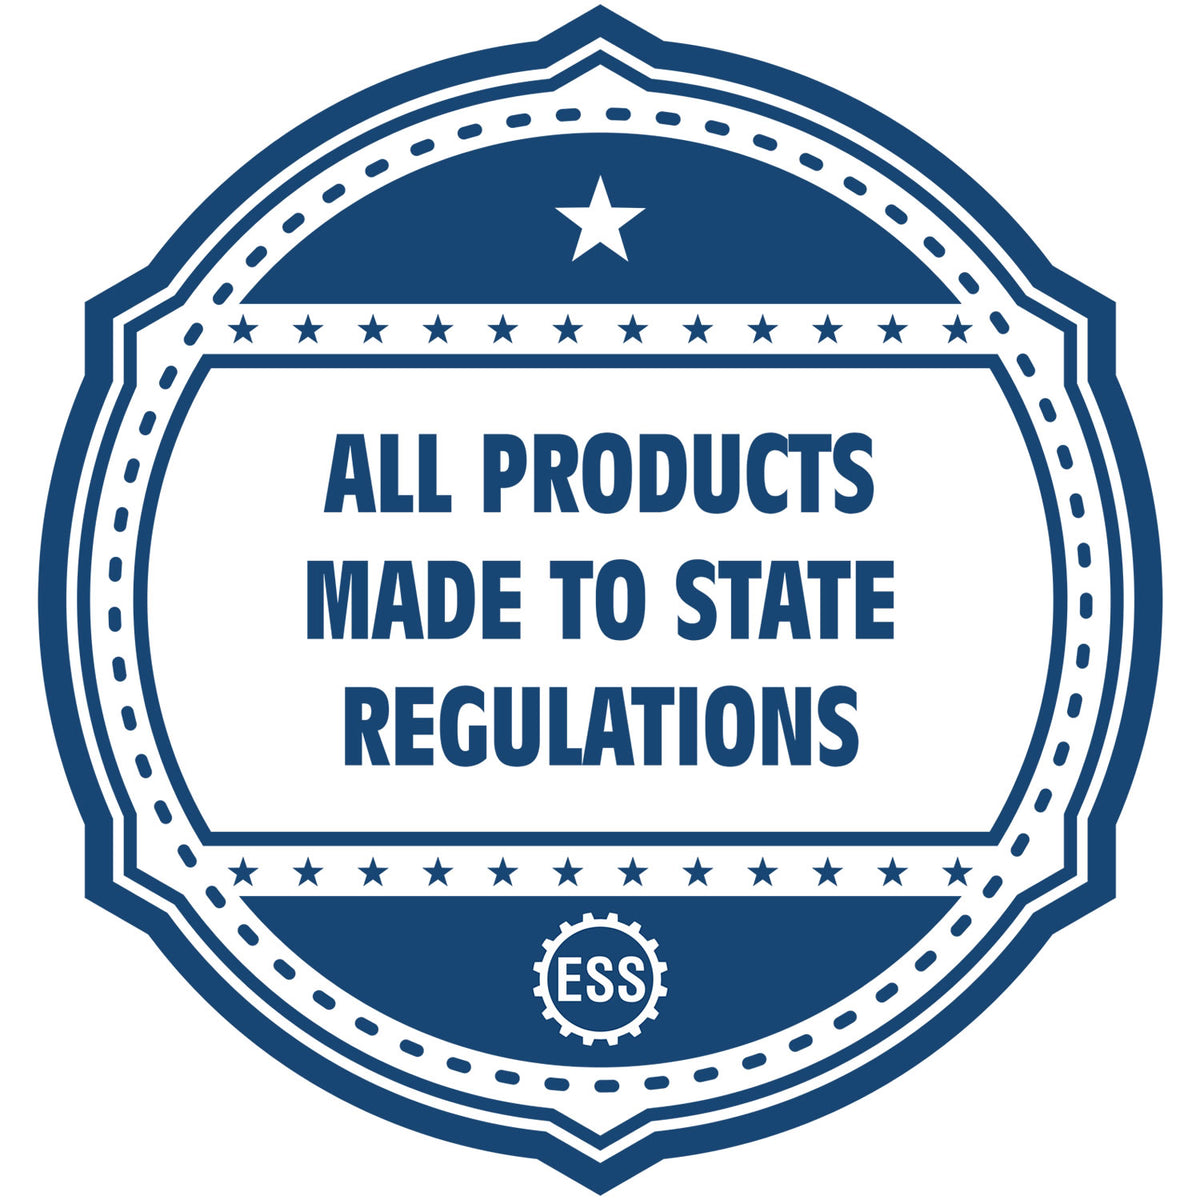 A blue icon or badge for the Hybrid North Carolina Engineer Seal showing that this product is made in compliance with state regulations.